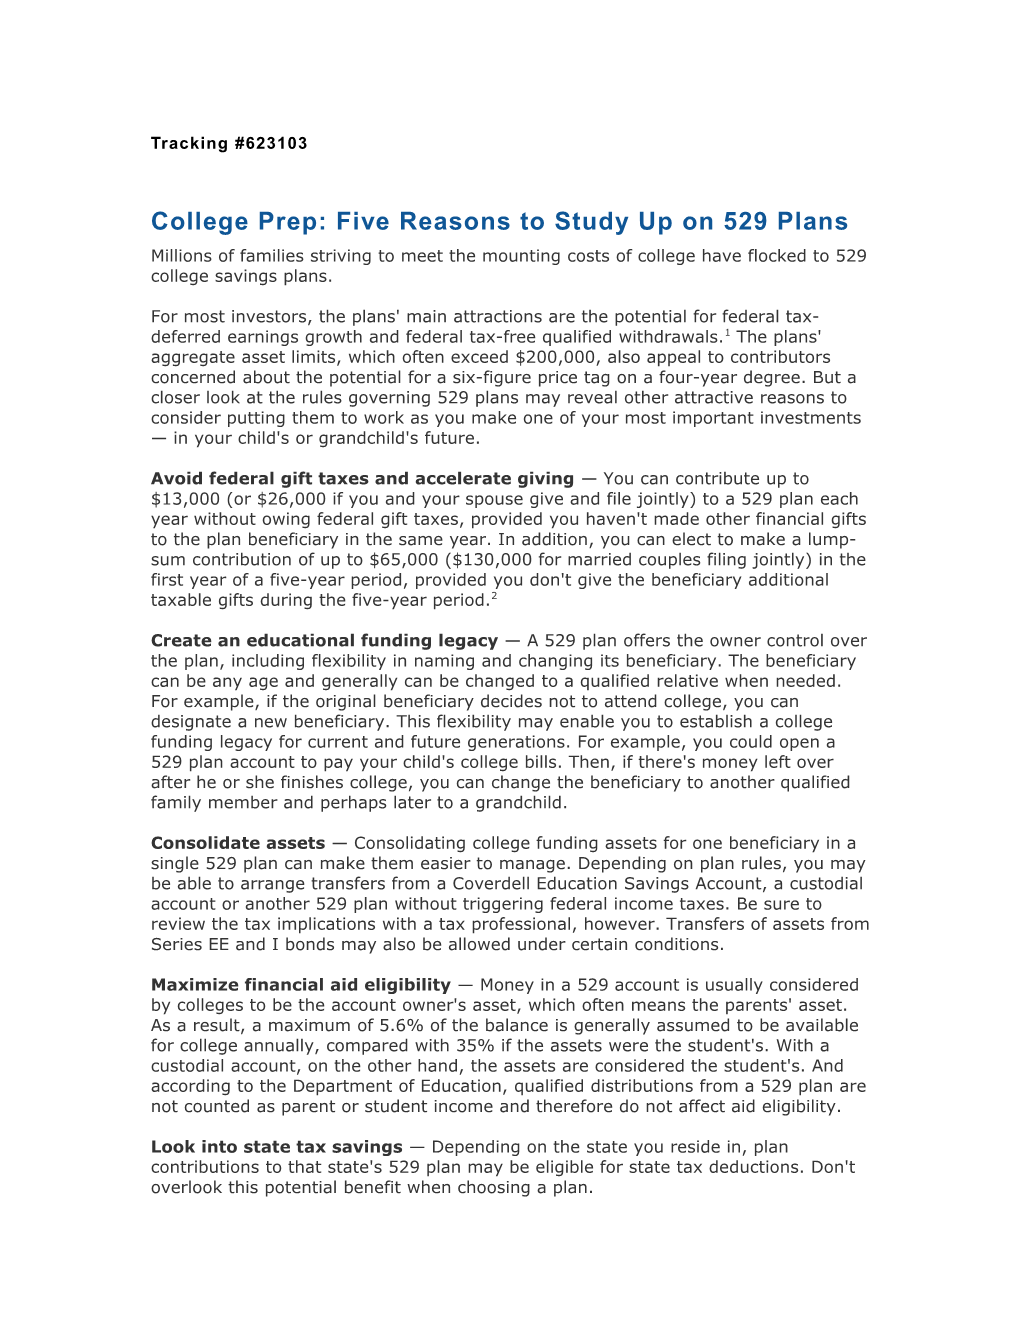 College Prep: Five Reasons to Study up on 529 Plans